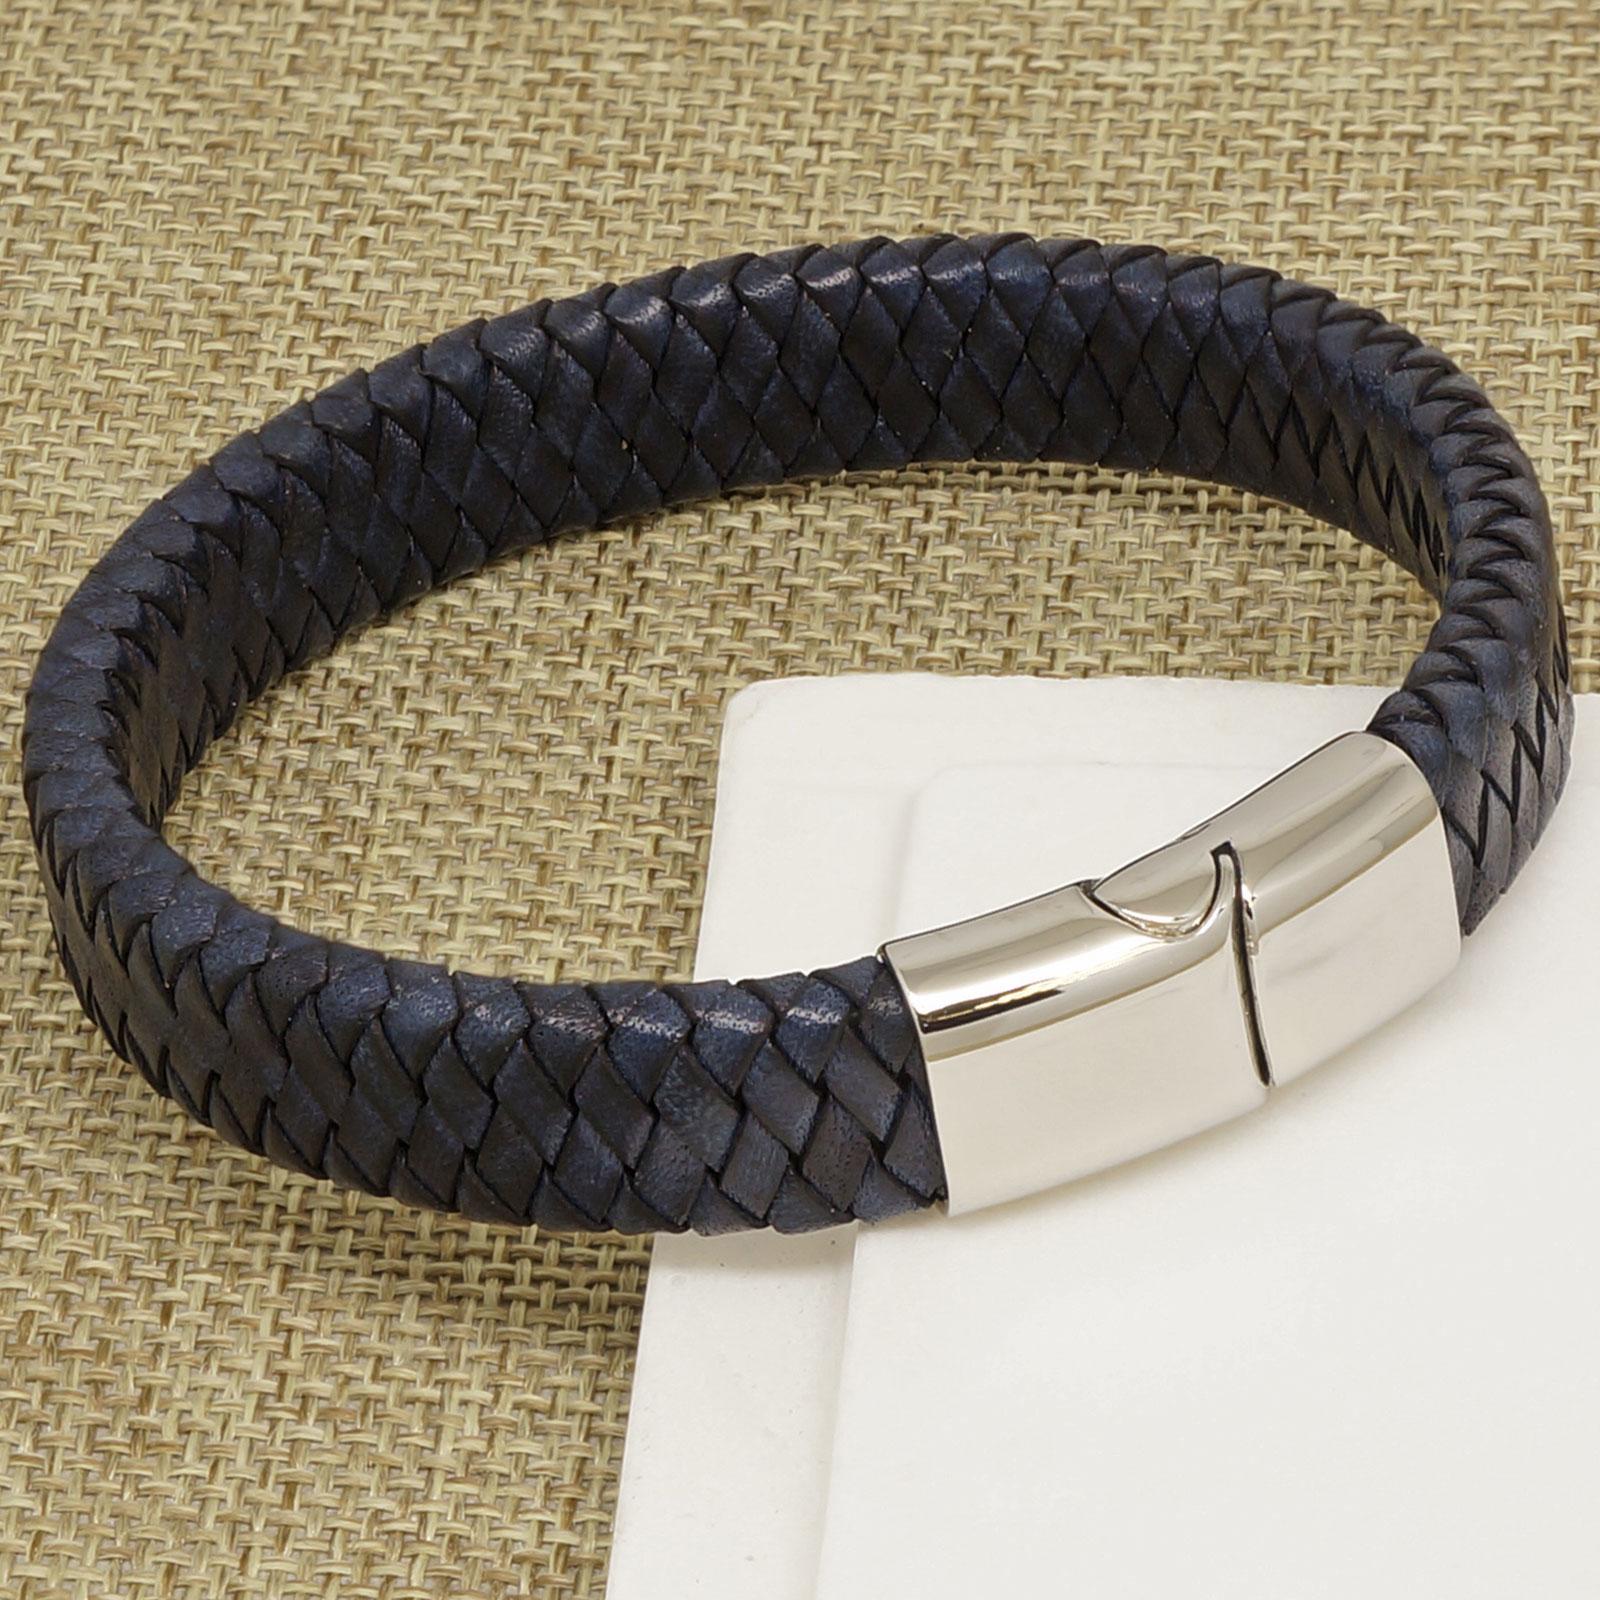 Mens Chunky Navy Blue Braided Leather Bracelet with a Silver Sliding Magnetic Clasp.